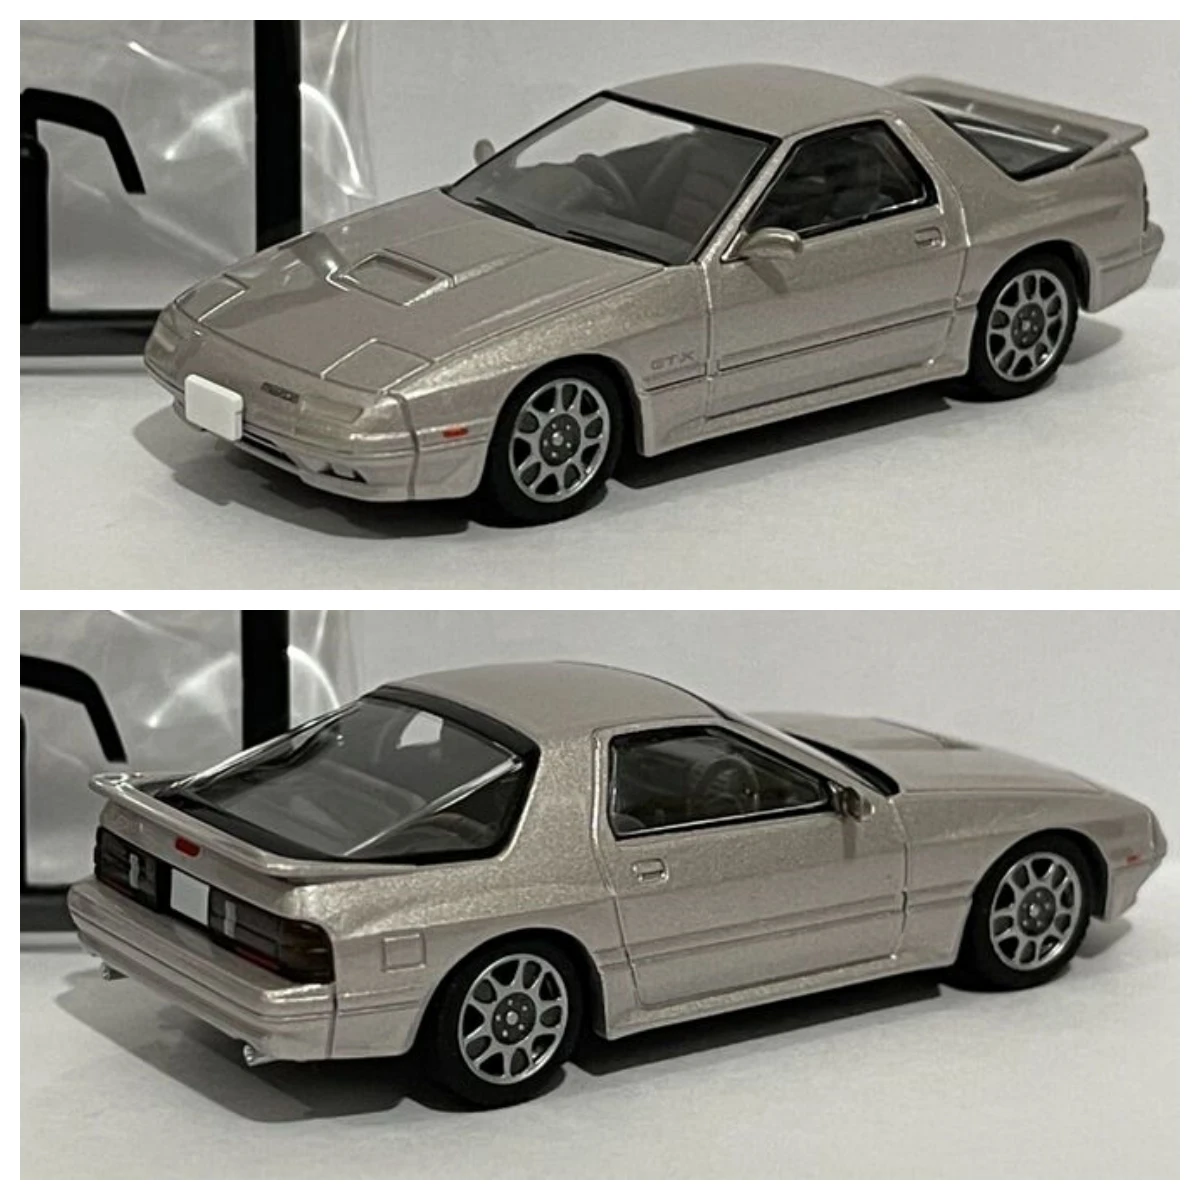 

Tomica Limited Vintage Neo Tomytec LV-N192h Savanna RX-7 GT-X Diecast Model Car Collection Limited Edition Hobby Toys